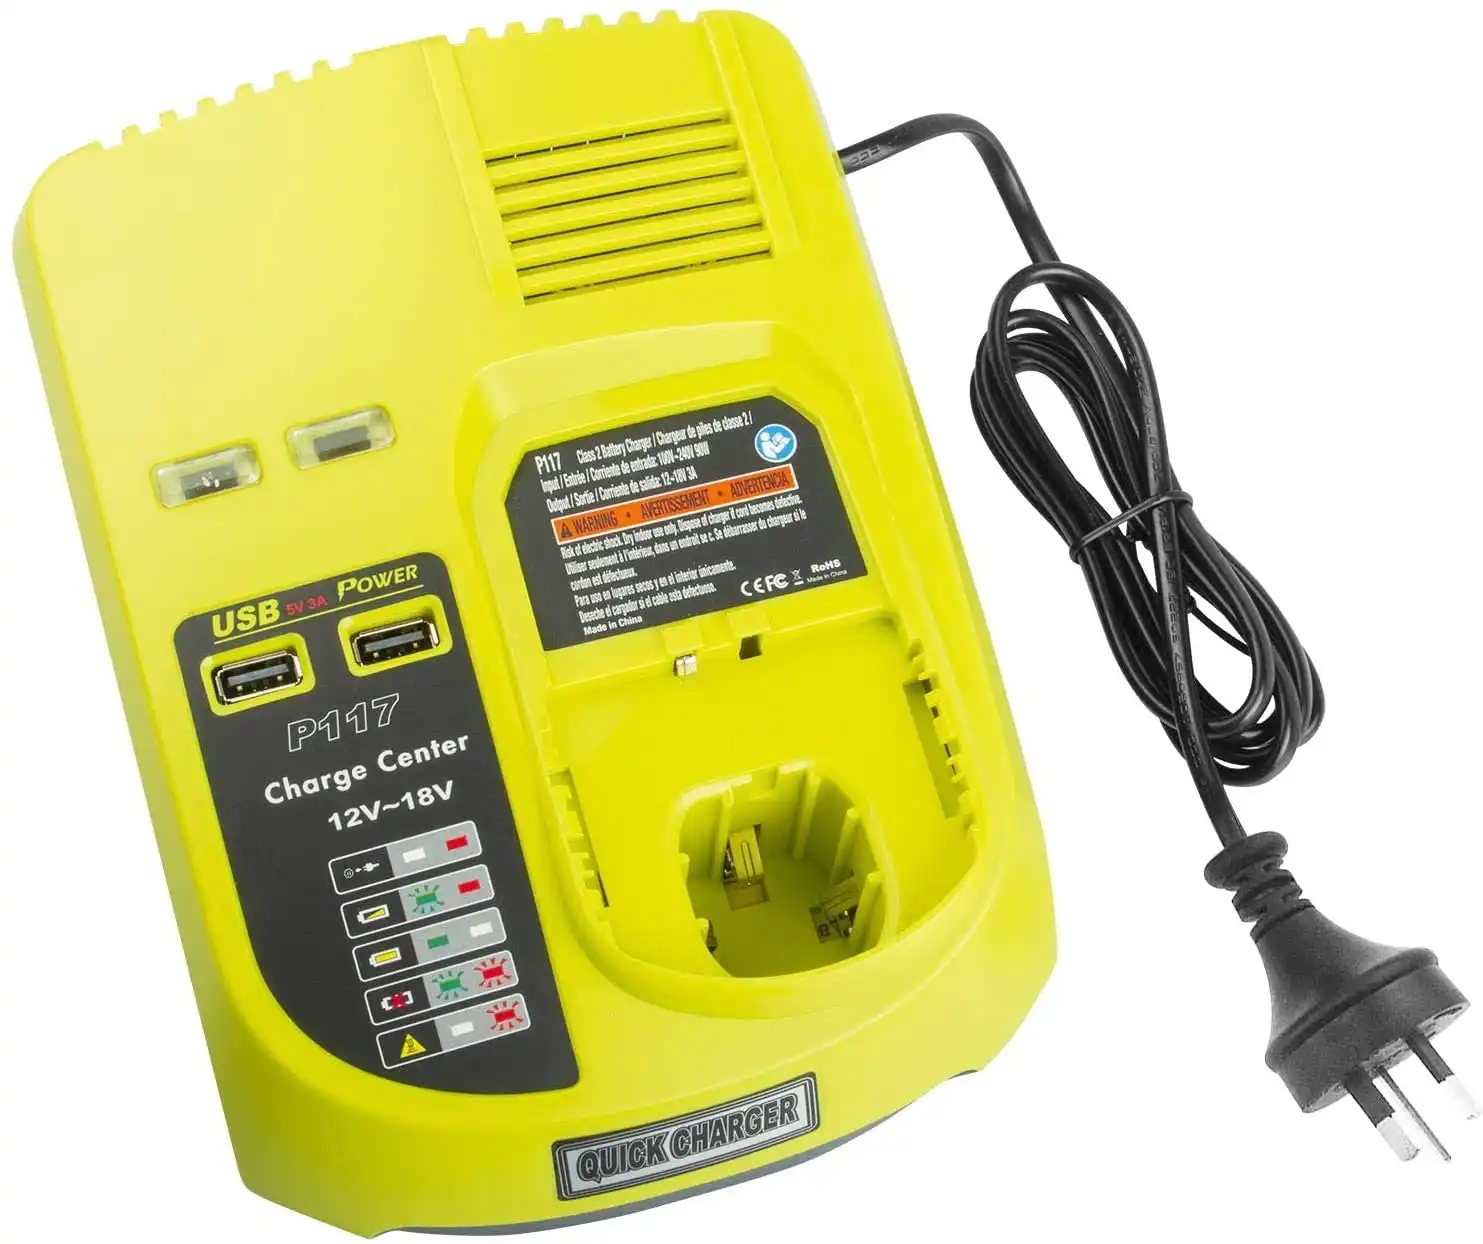 Ryobi One Plus Battery Charger P117 Replacement | 18V-12V Dual Chemistry IntelliPort